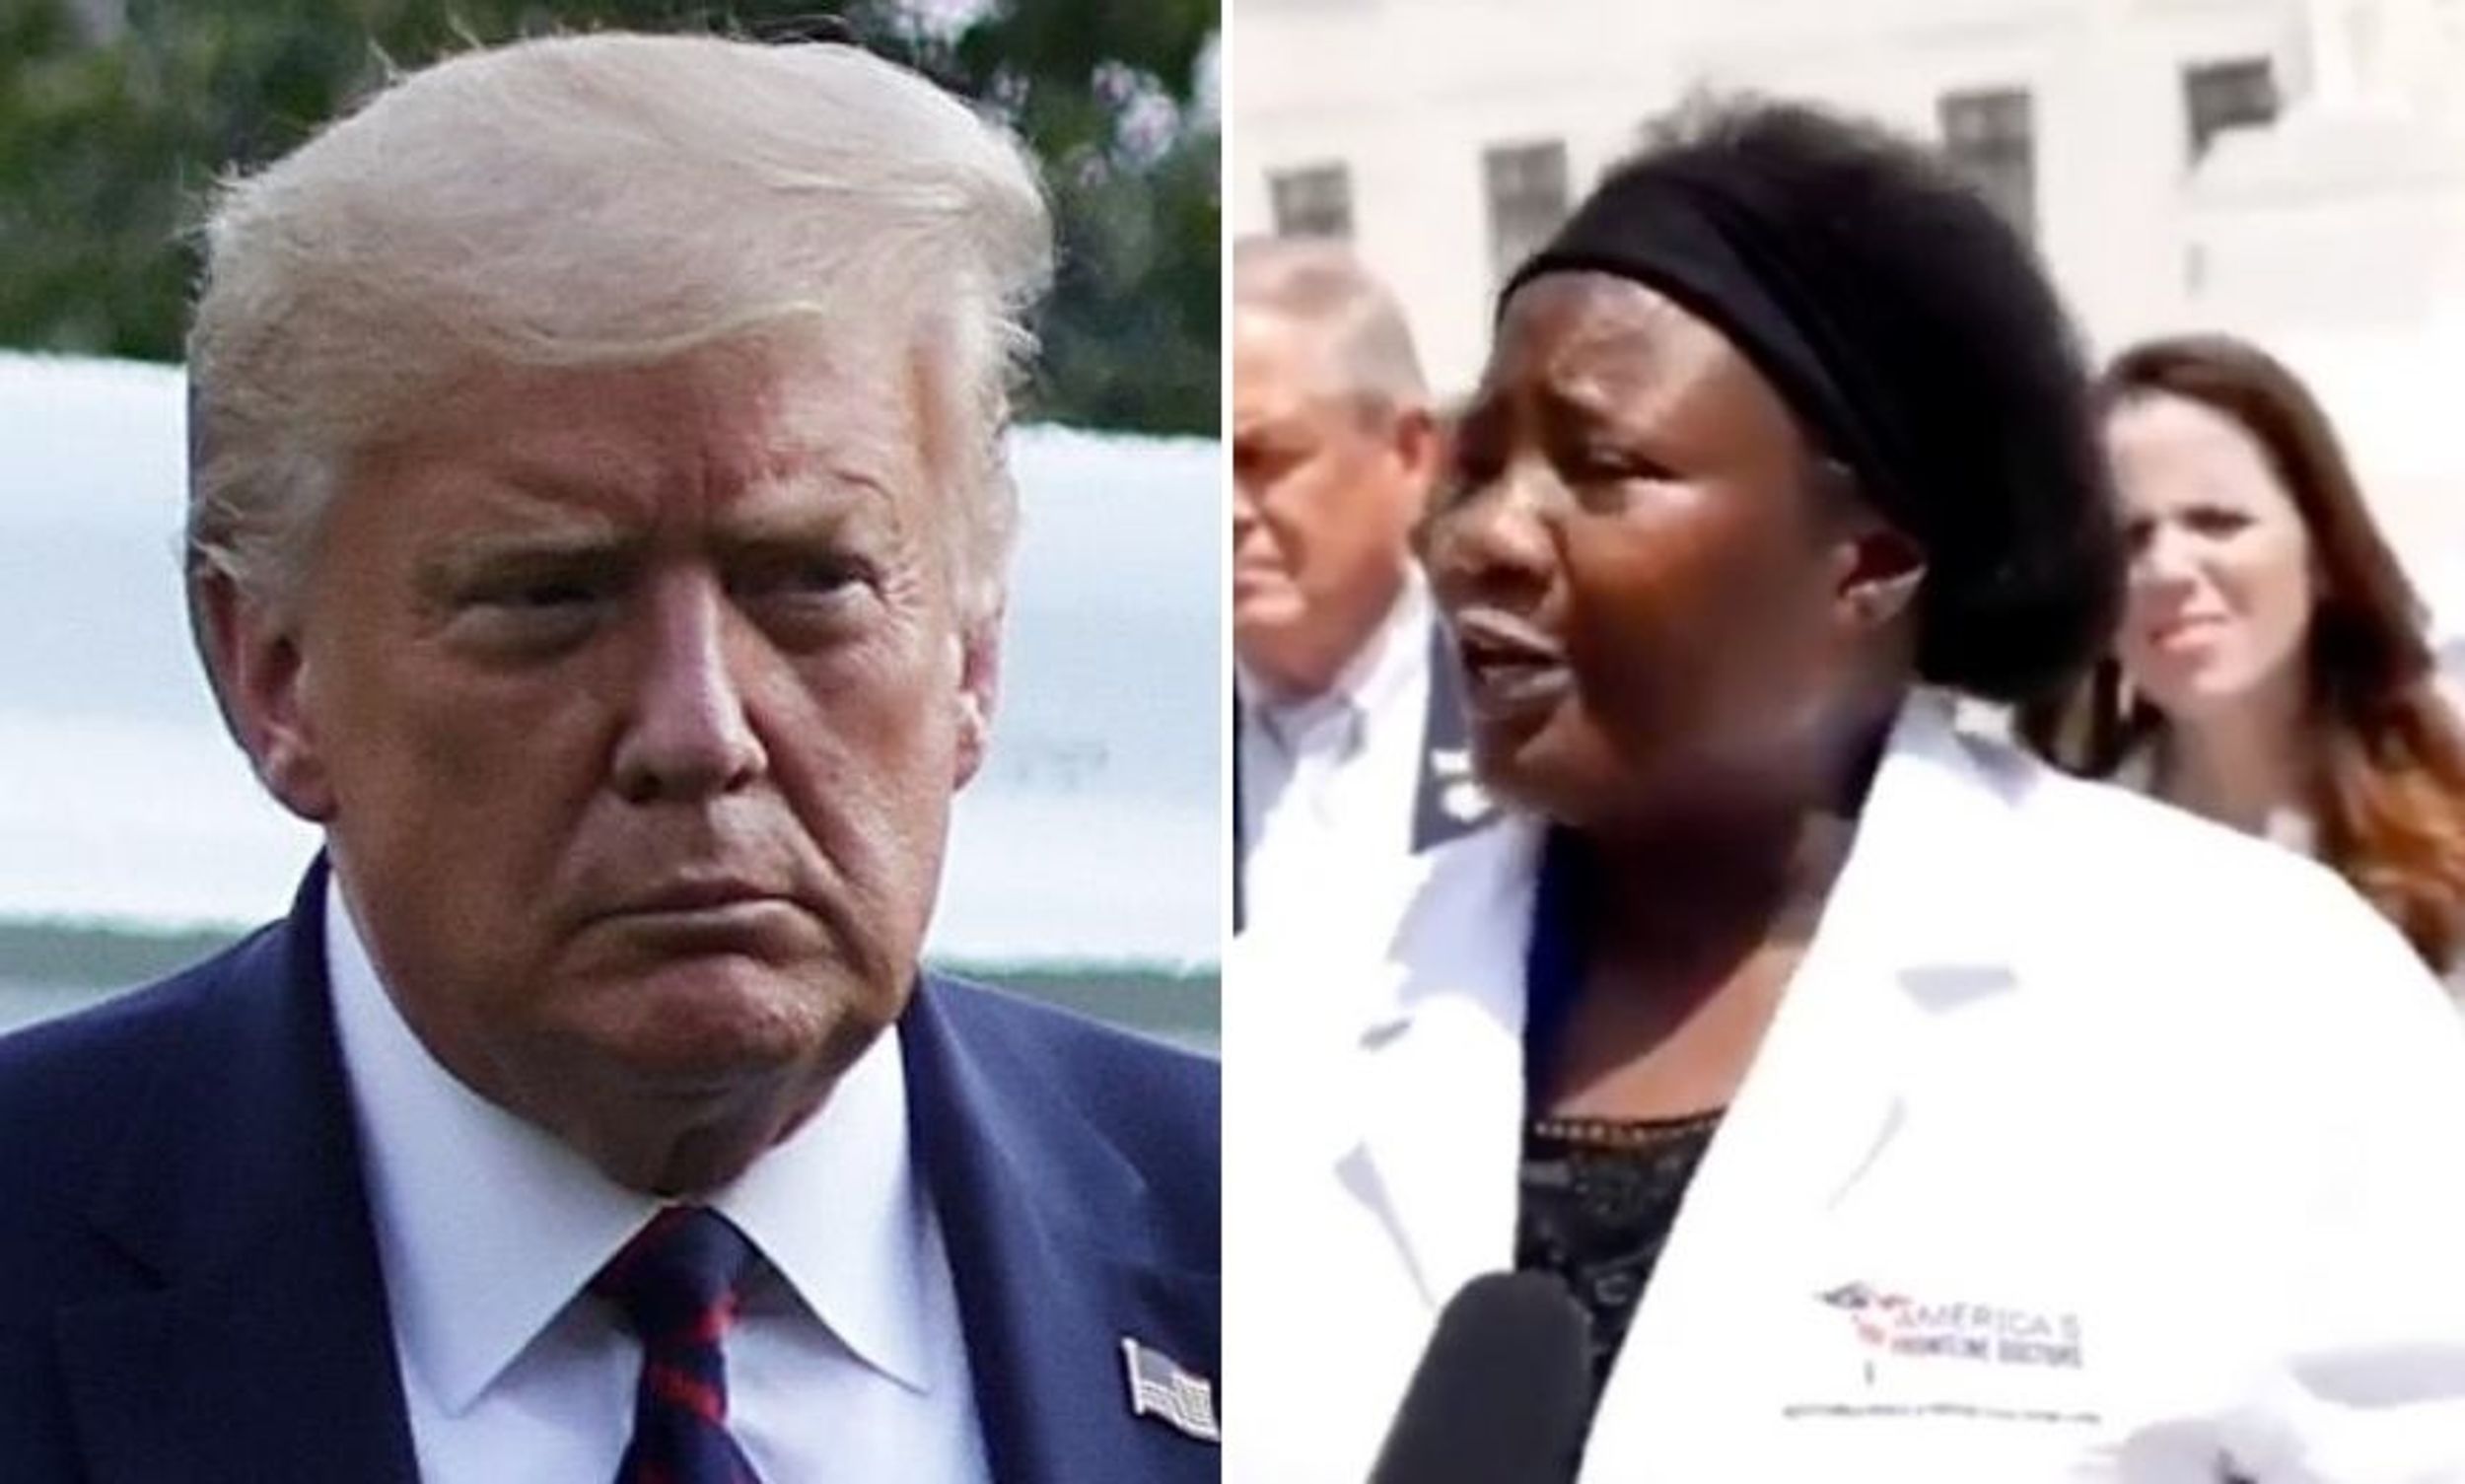 Twitter Pulls Viral Video of 'Doctors' Claiming Hydroxychloroquine Works and 'You Don't Need Masks' After Trump Retweet